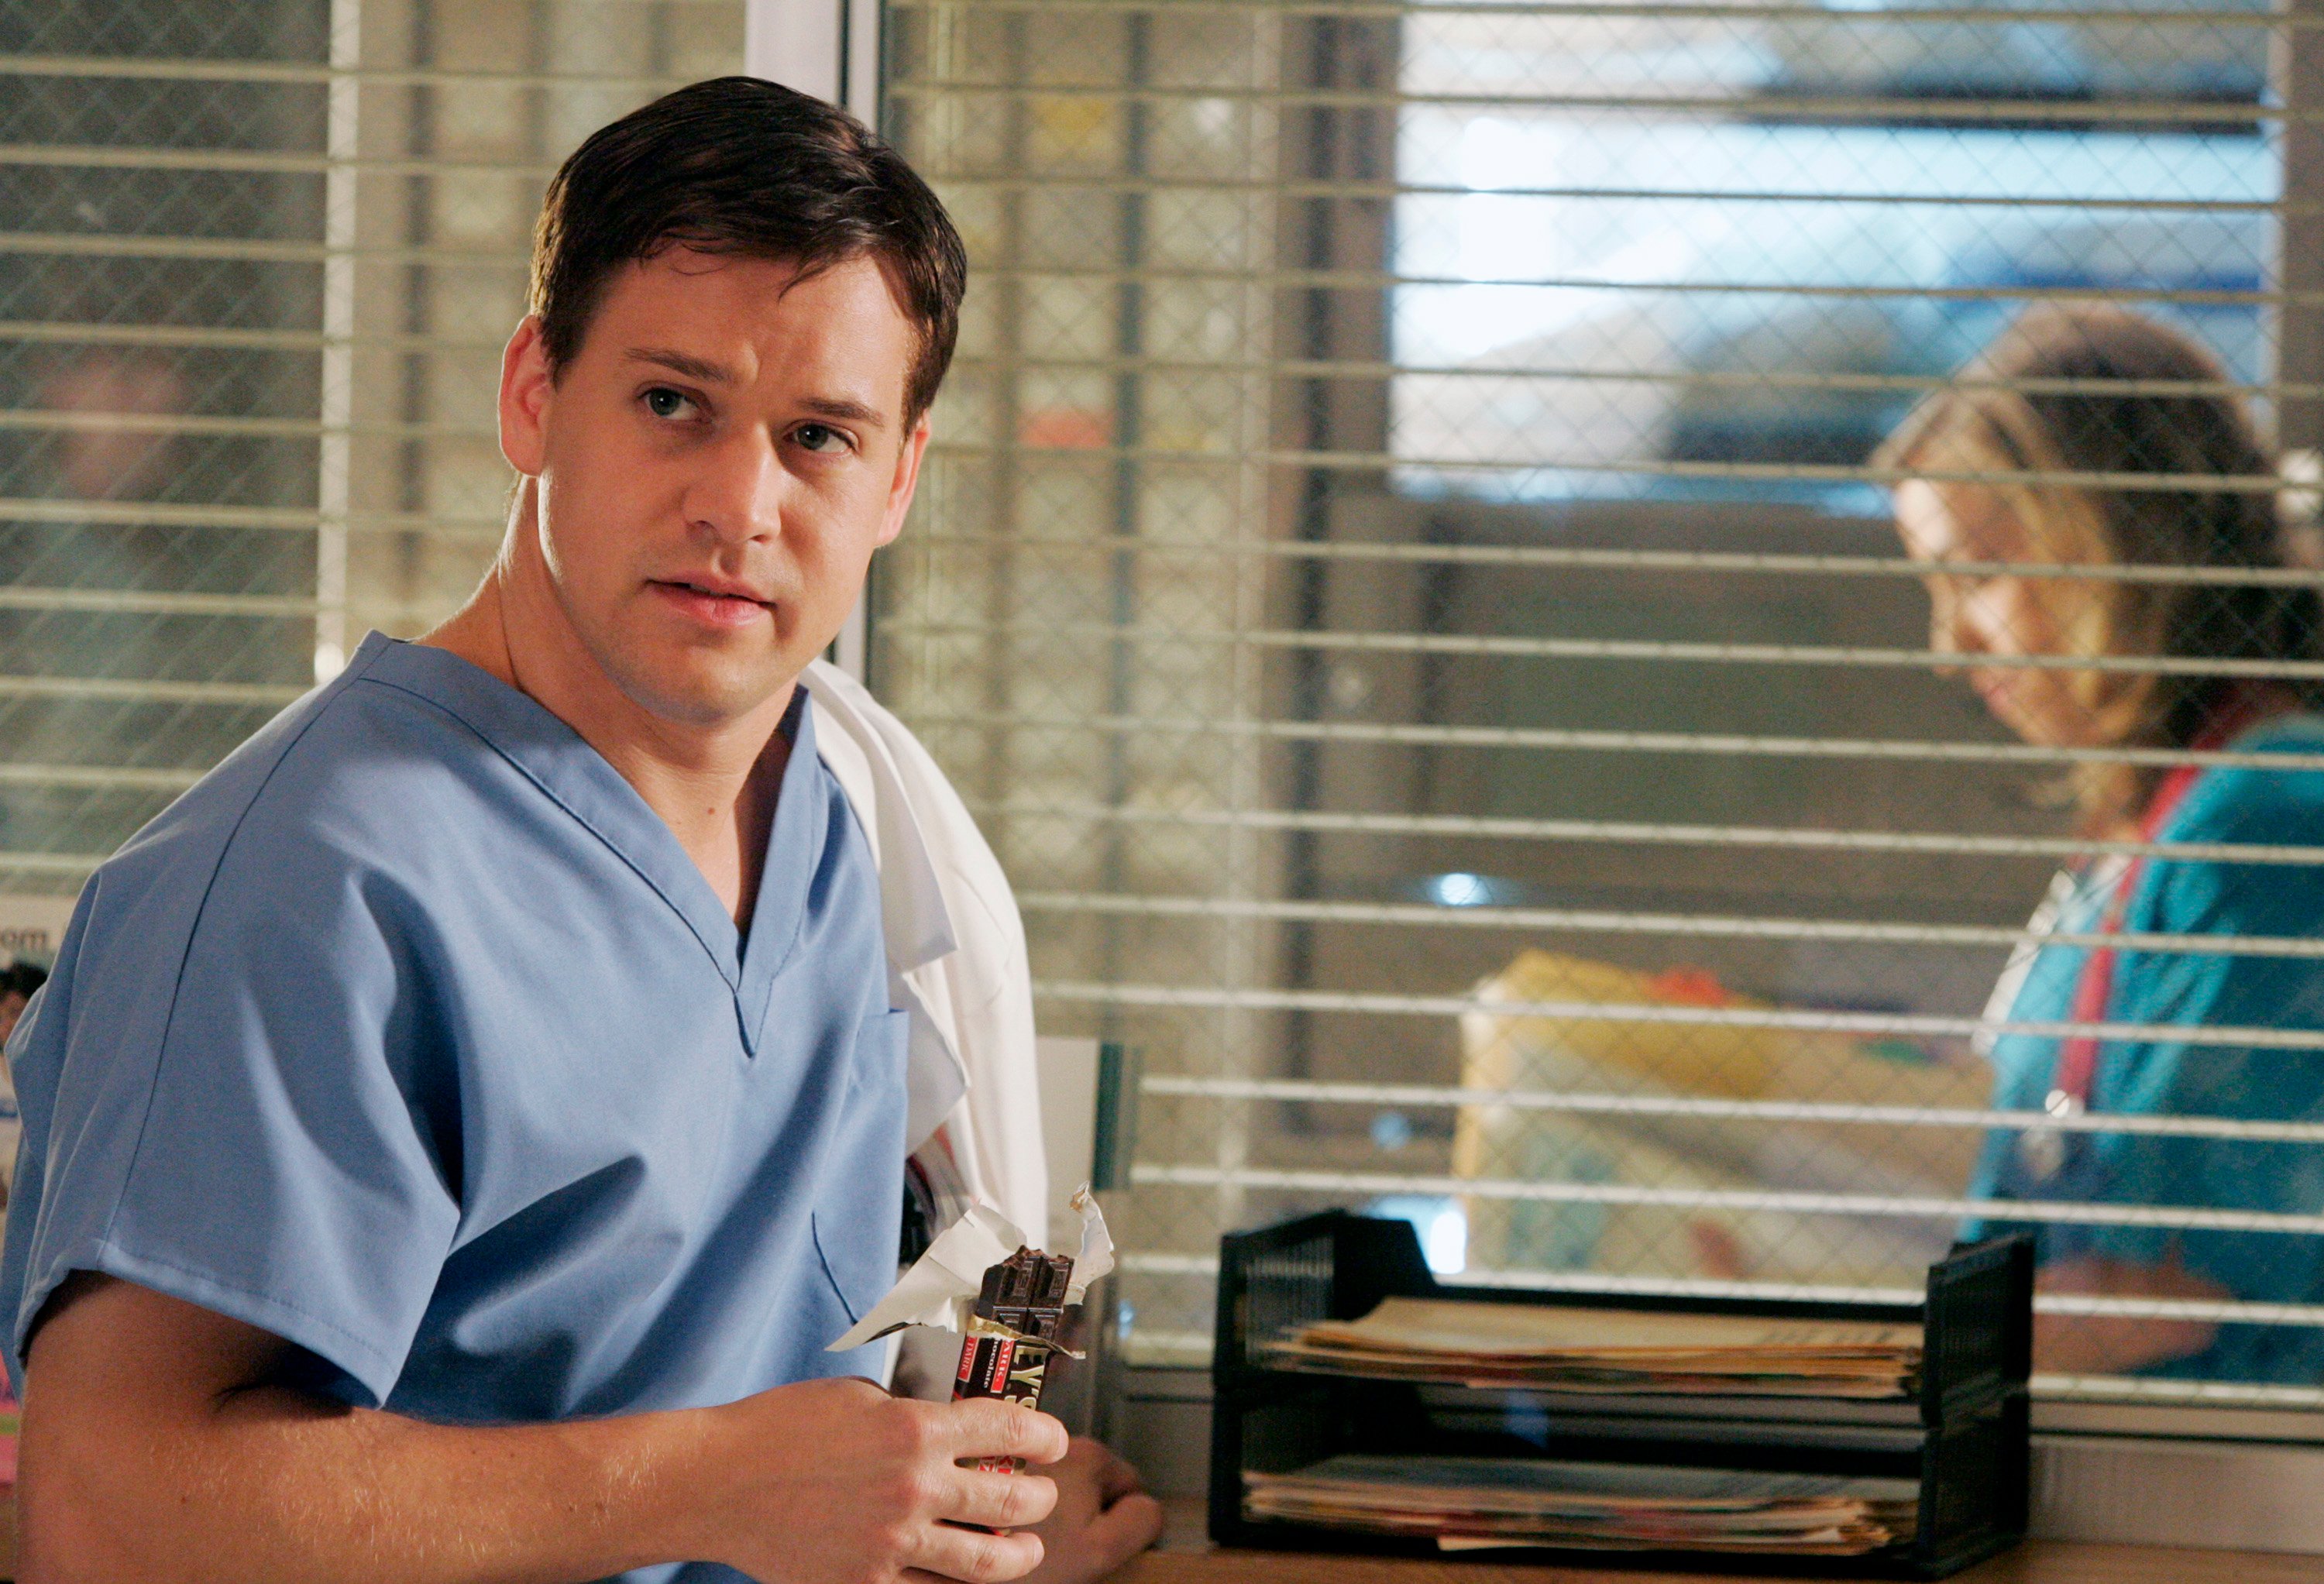 'Grey's Anatomy' actor T.R. Knight wearing light blue medical scrubs as George O'Malley.